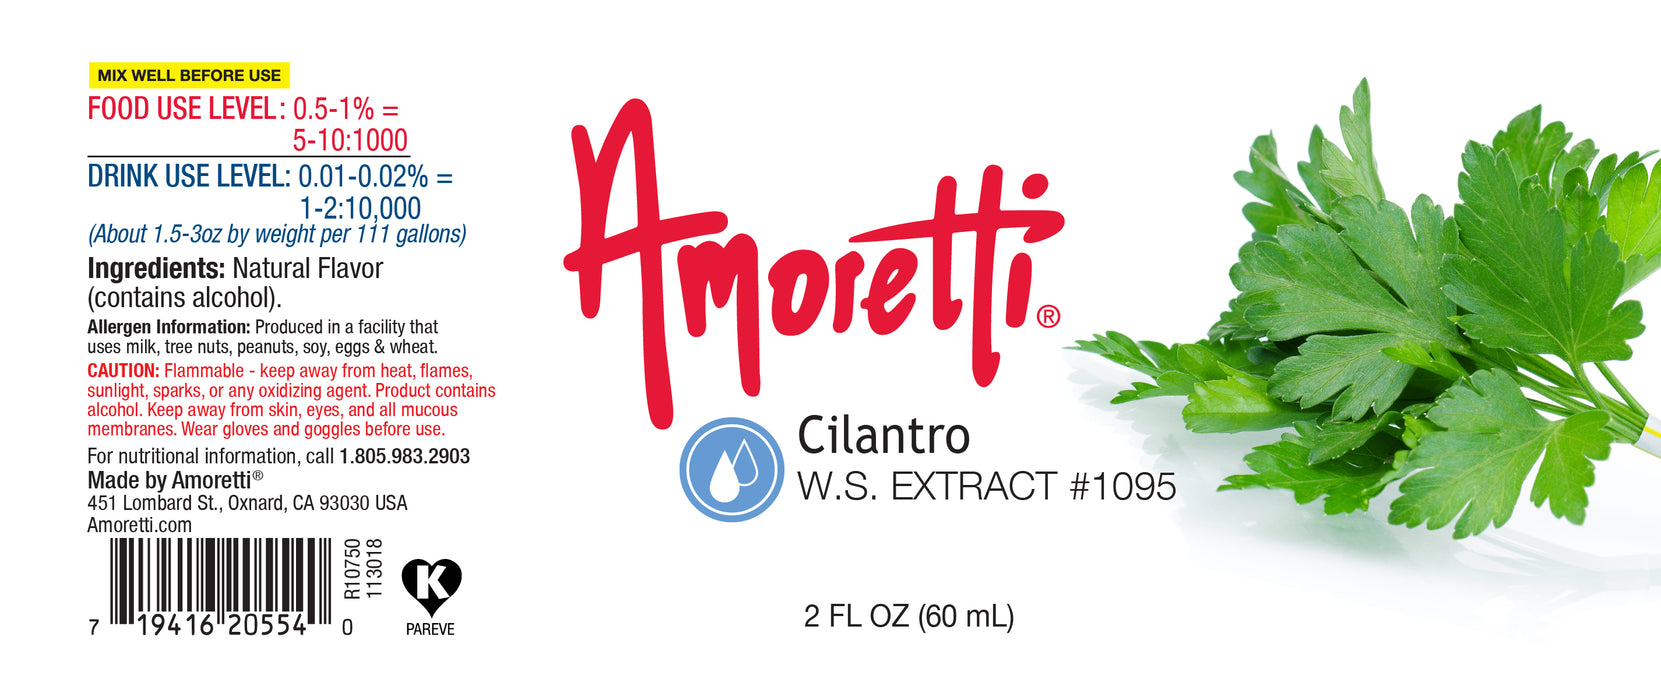 Cilantro Extract Water Soluble